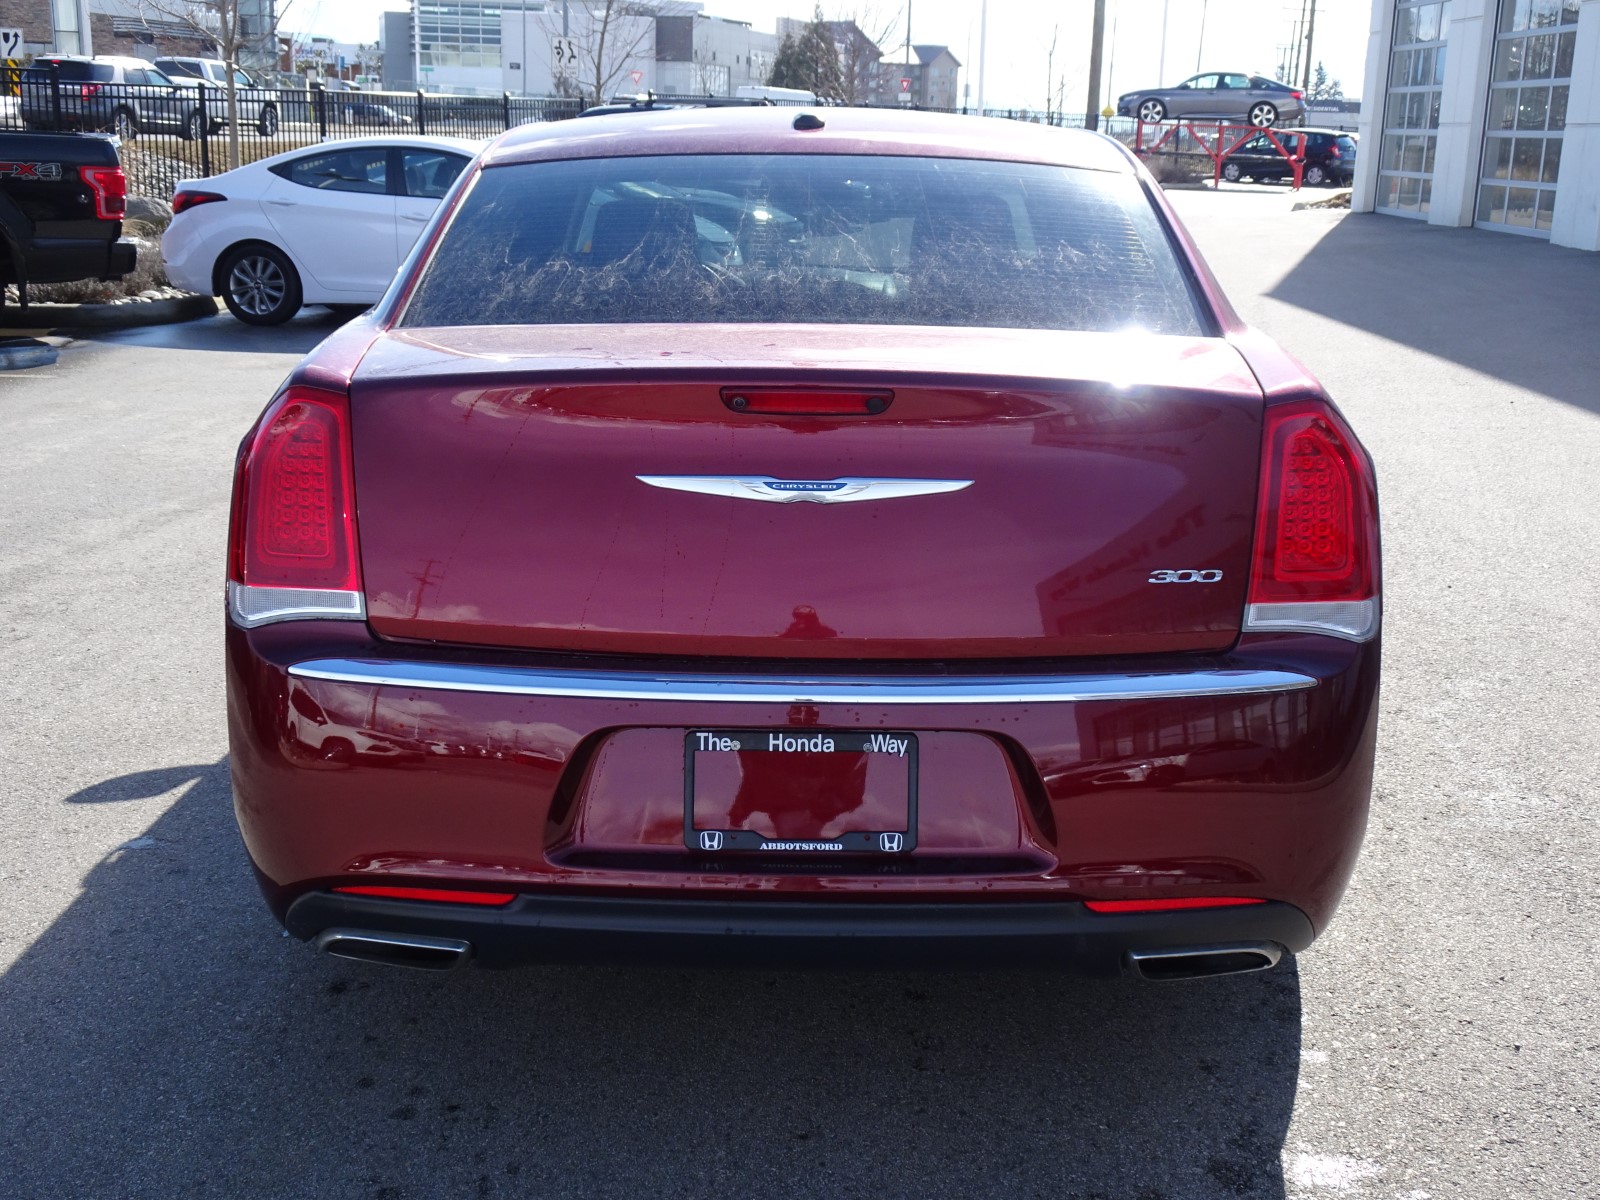 Used 2016 Chrysler 300 in Abbotsford,BC